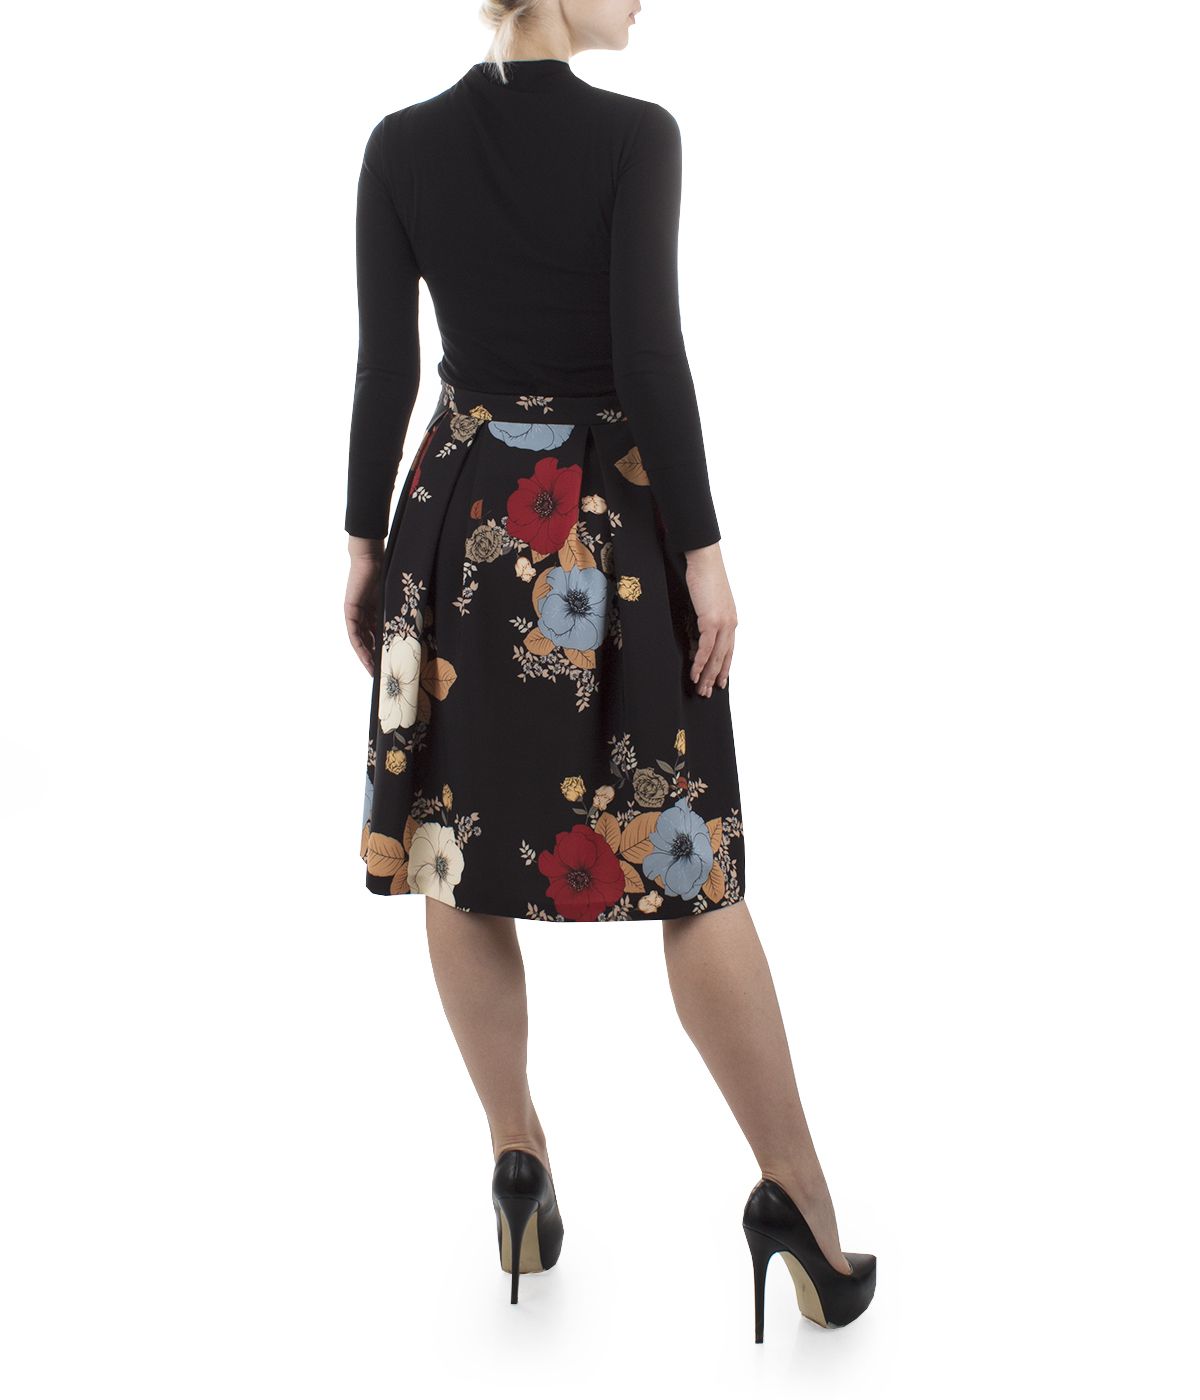 Midi skirt with box pleats and floral print  3